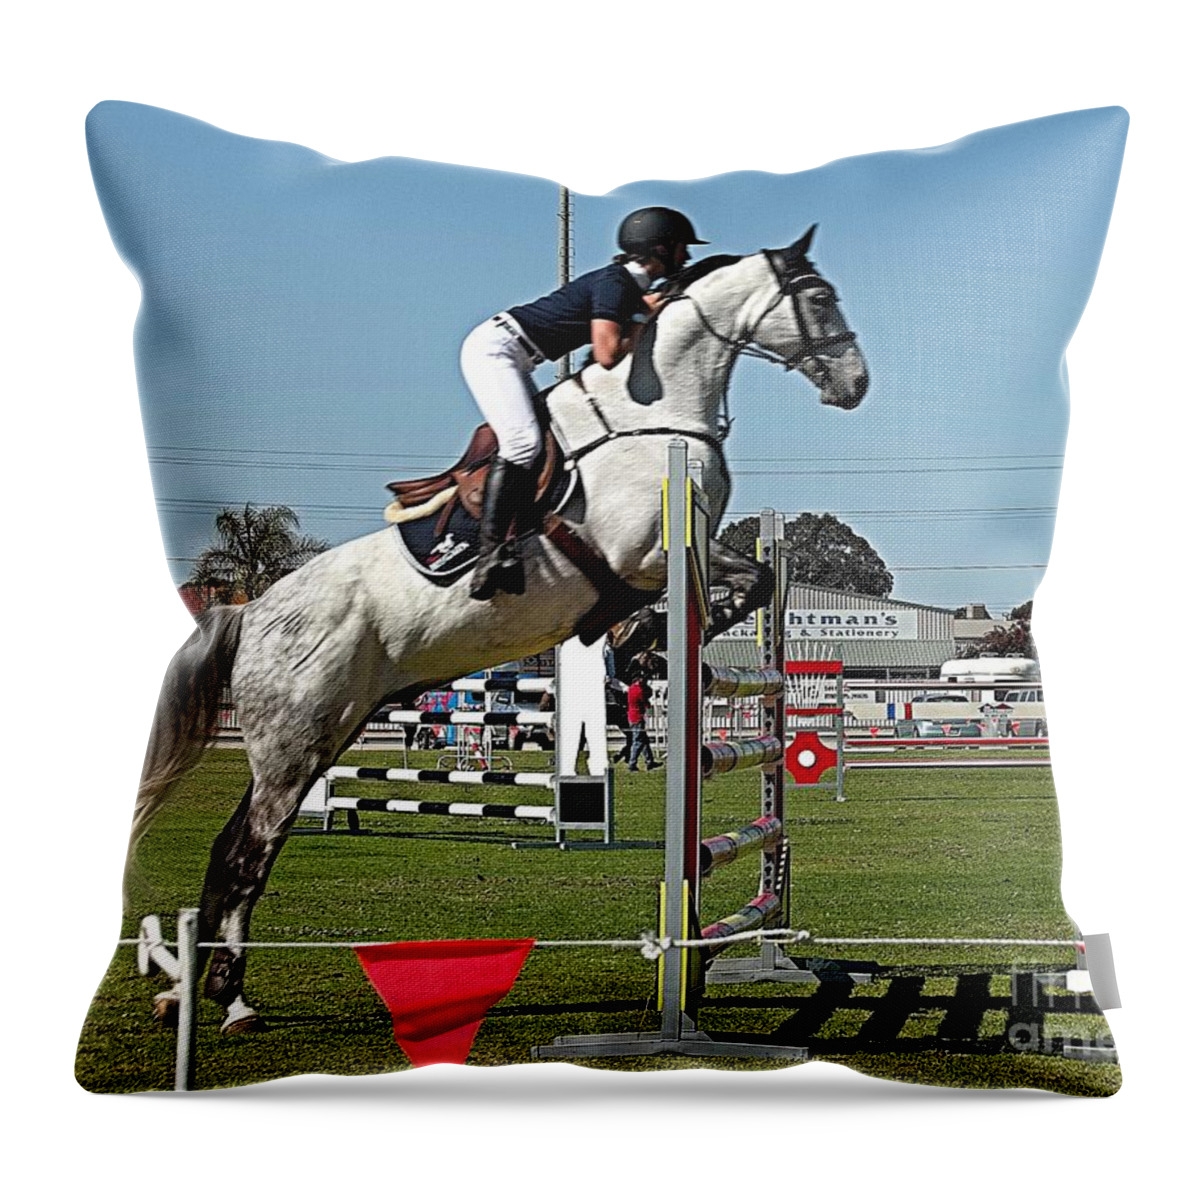 Over The Hurdles Throw Pillow featuring the photograph Over the Hurdles by Blair Stuart